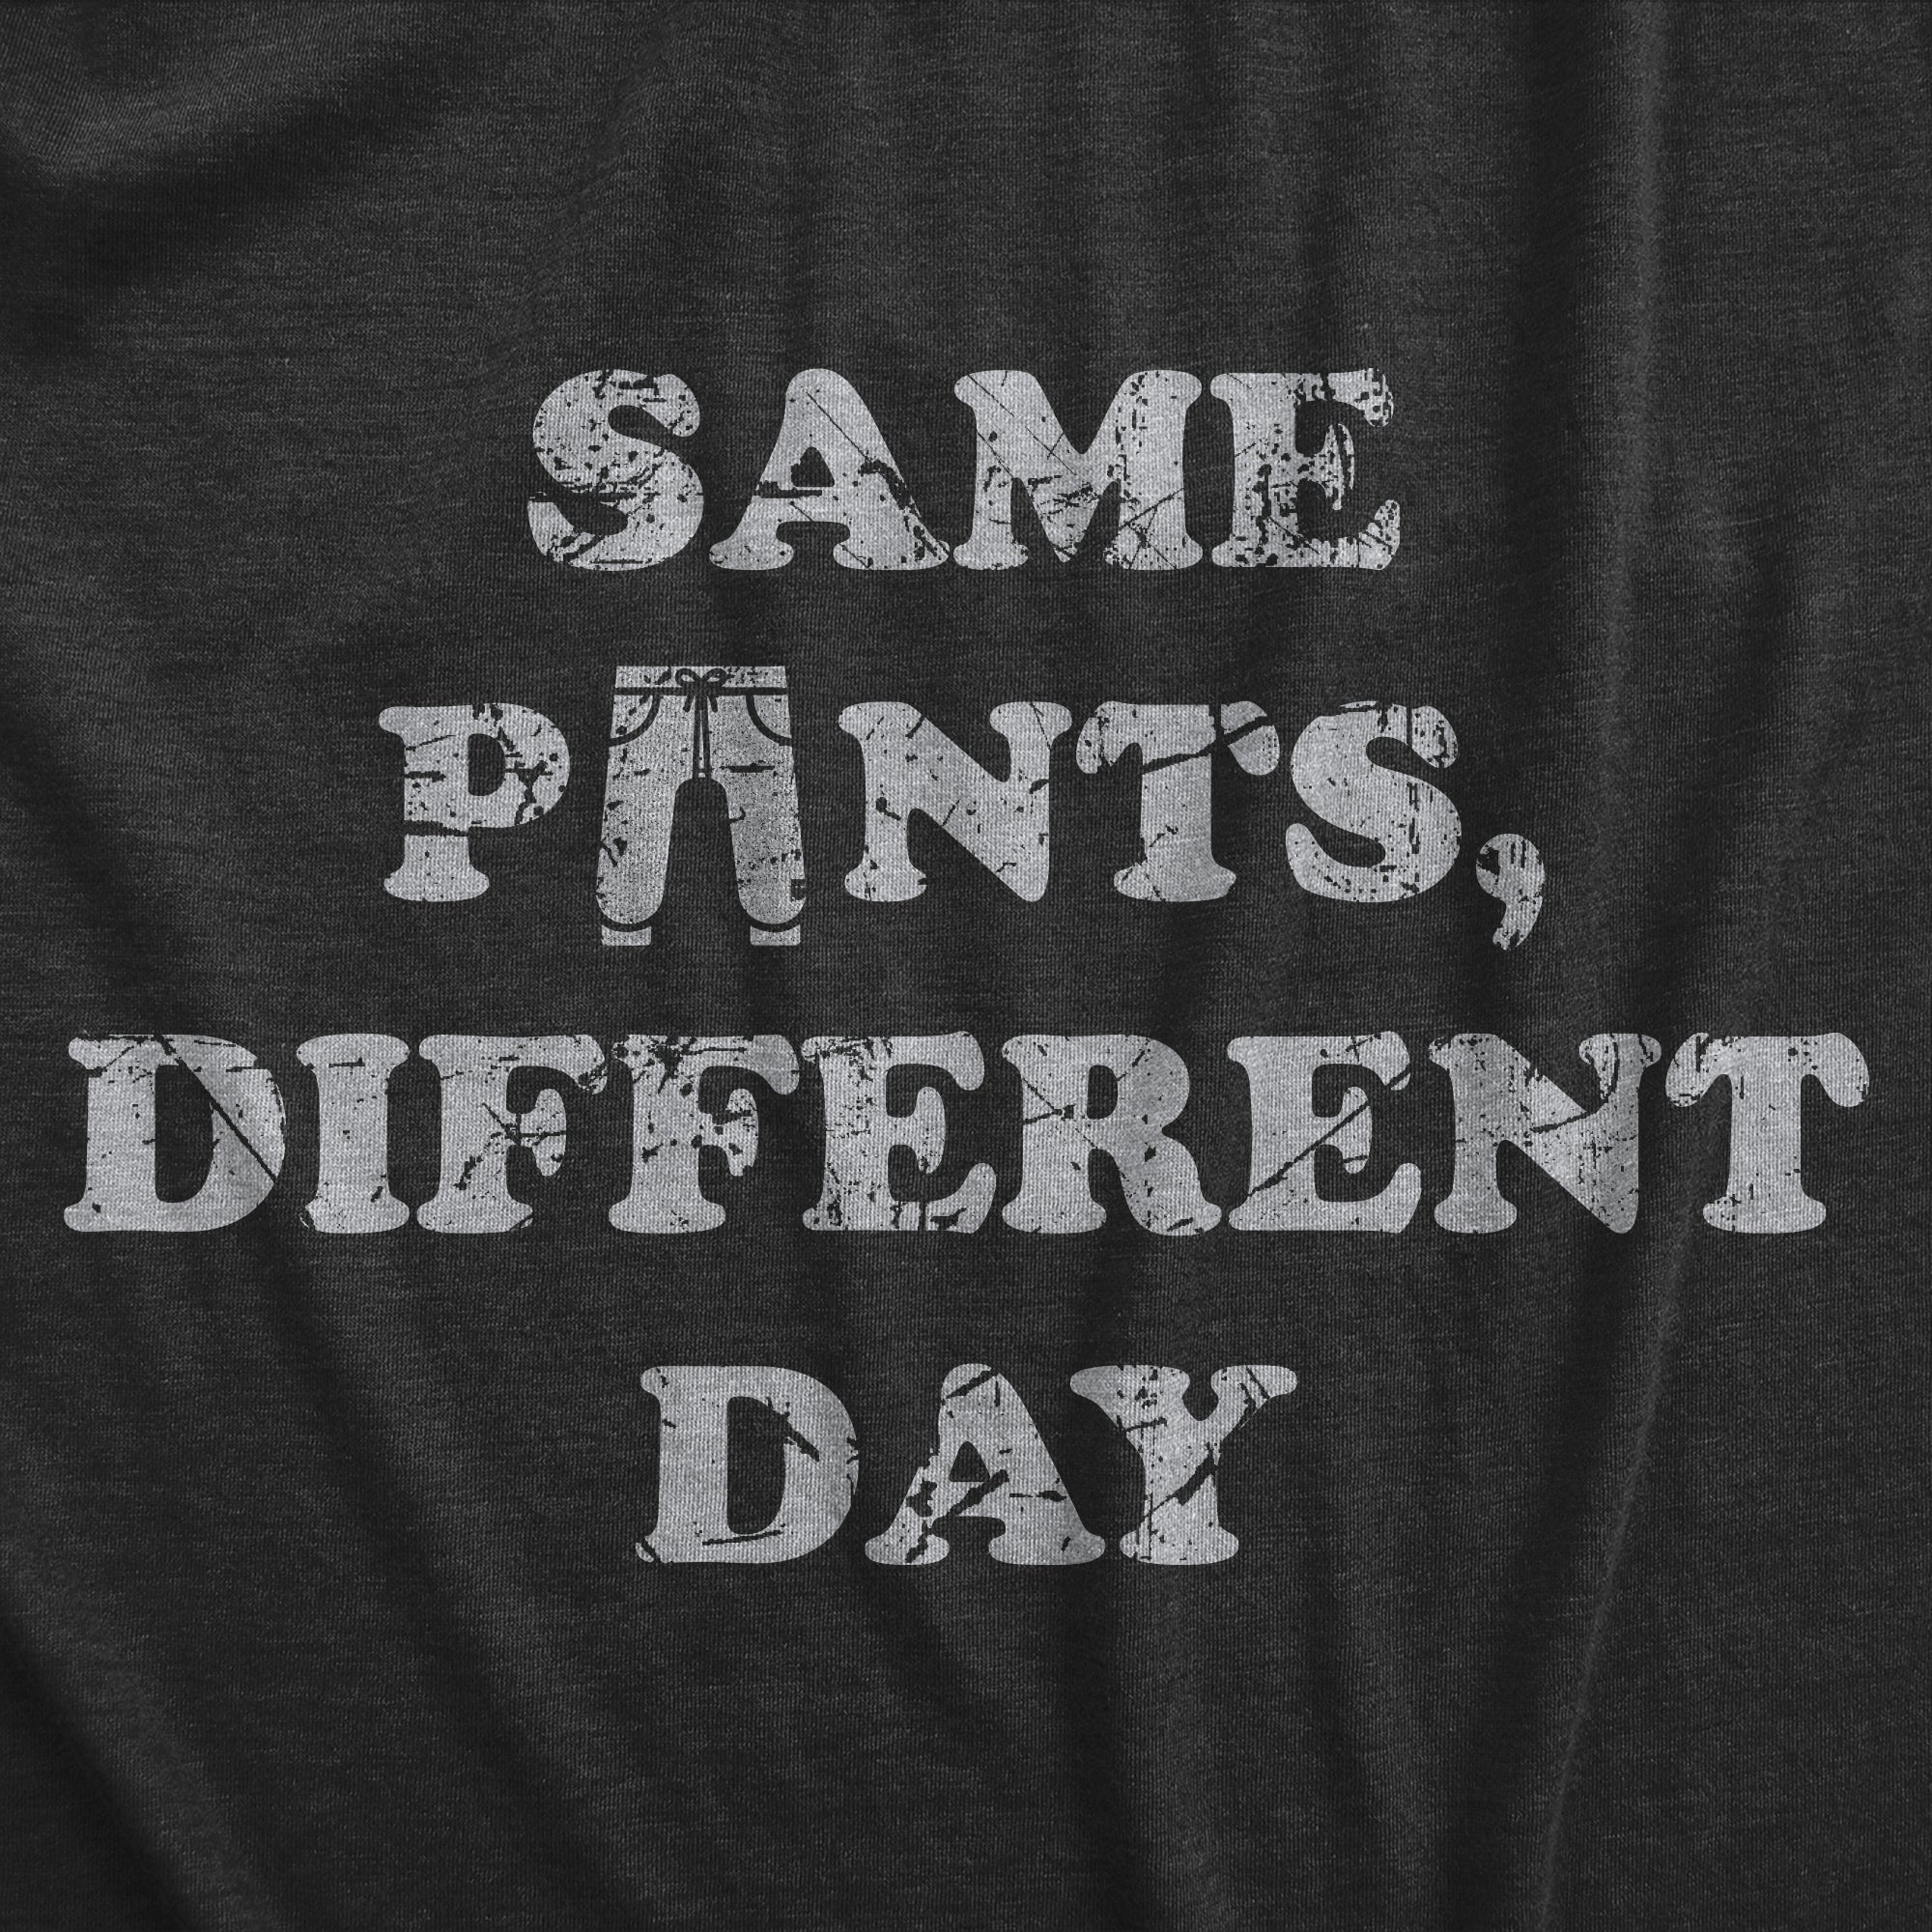 Funny Heather Black - PANTS Same Pants Different Day Womens T Shirt Nerdy Sarcastic Tee